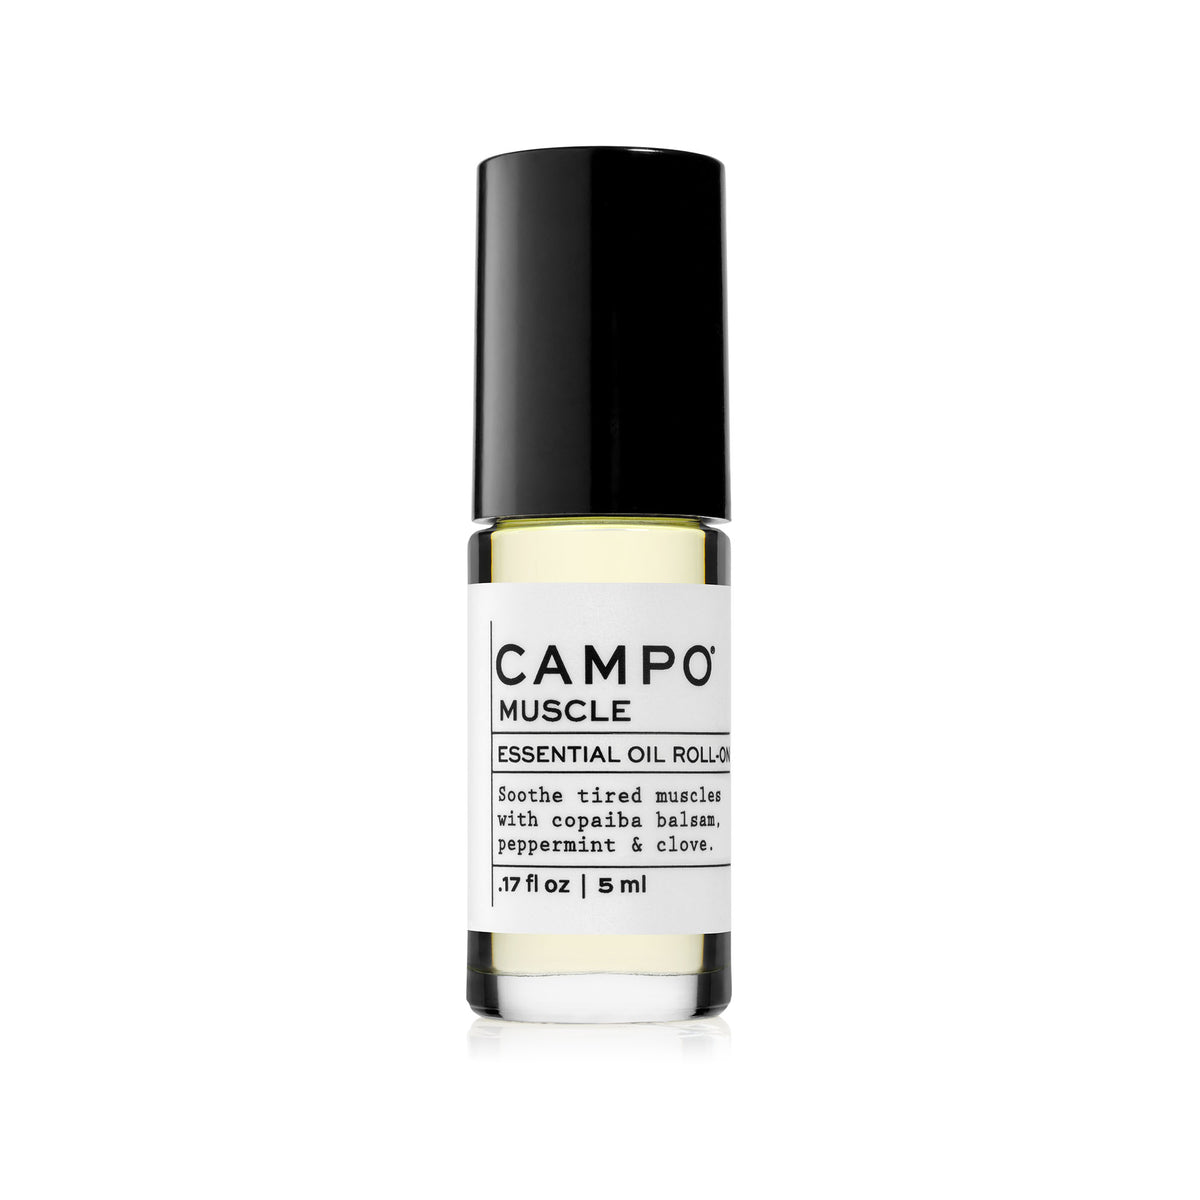 Campo Beauty Essential Oil MUSCLE Stretch Mark Relief Blend Roll-On that in 5 ml. Soothe sore muscles and pain. Relieve tension with this 100% natural essential oil roll-on blend of copaiba balsam, peppermint, eucalyptus &amp; clove.